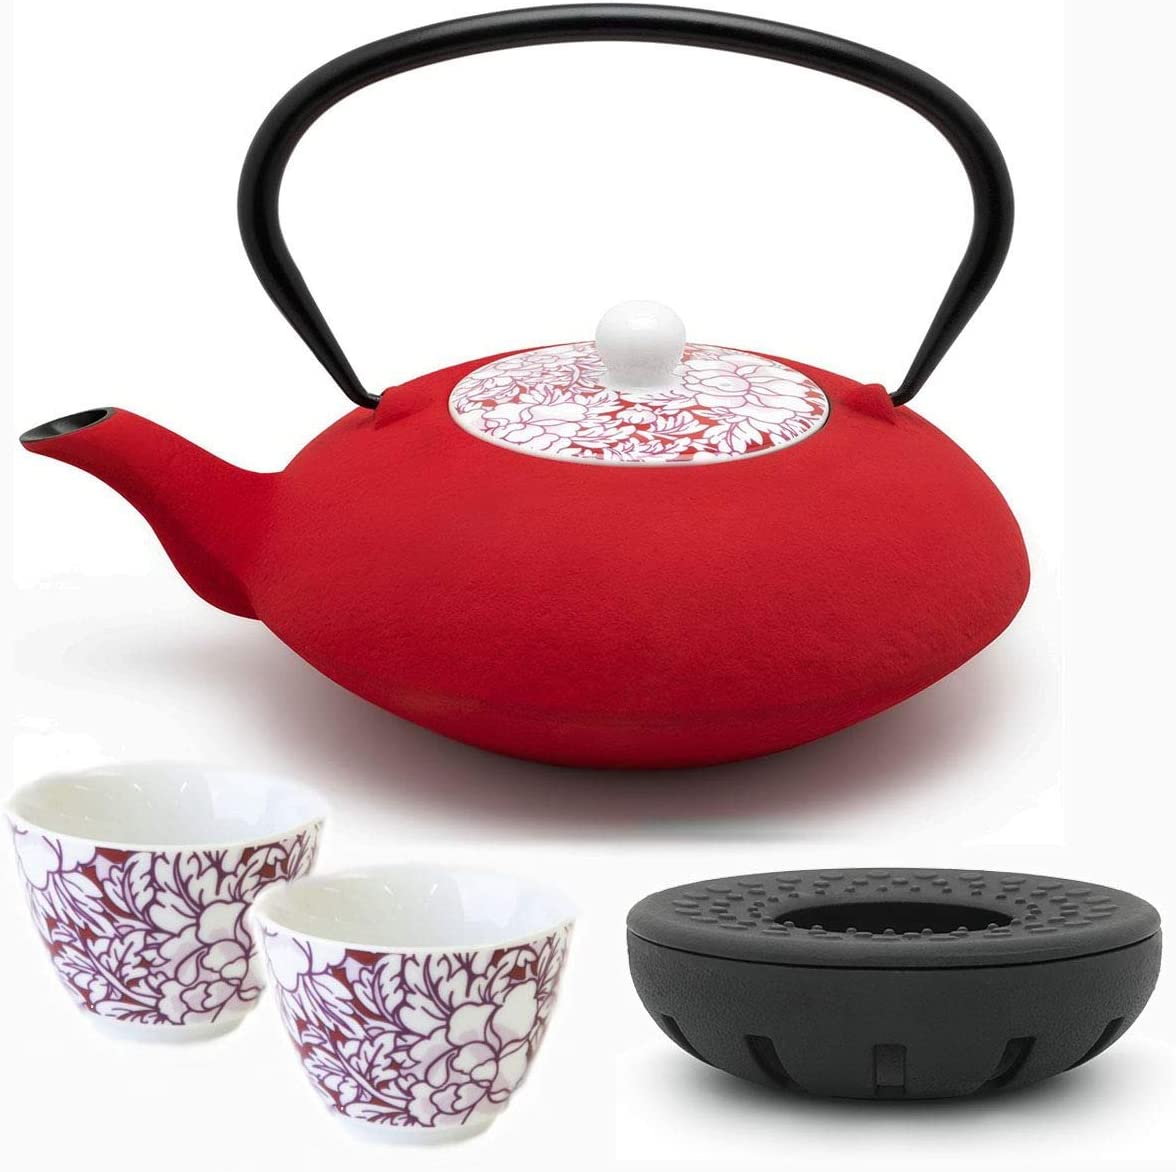 Bredemeijer Asian Cast Iron Teapot Set Red 1.2 Litres with Tea Filter Strainer and Cast Iron Teapot Warmer Including 2 Tea Cups Porcelain